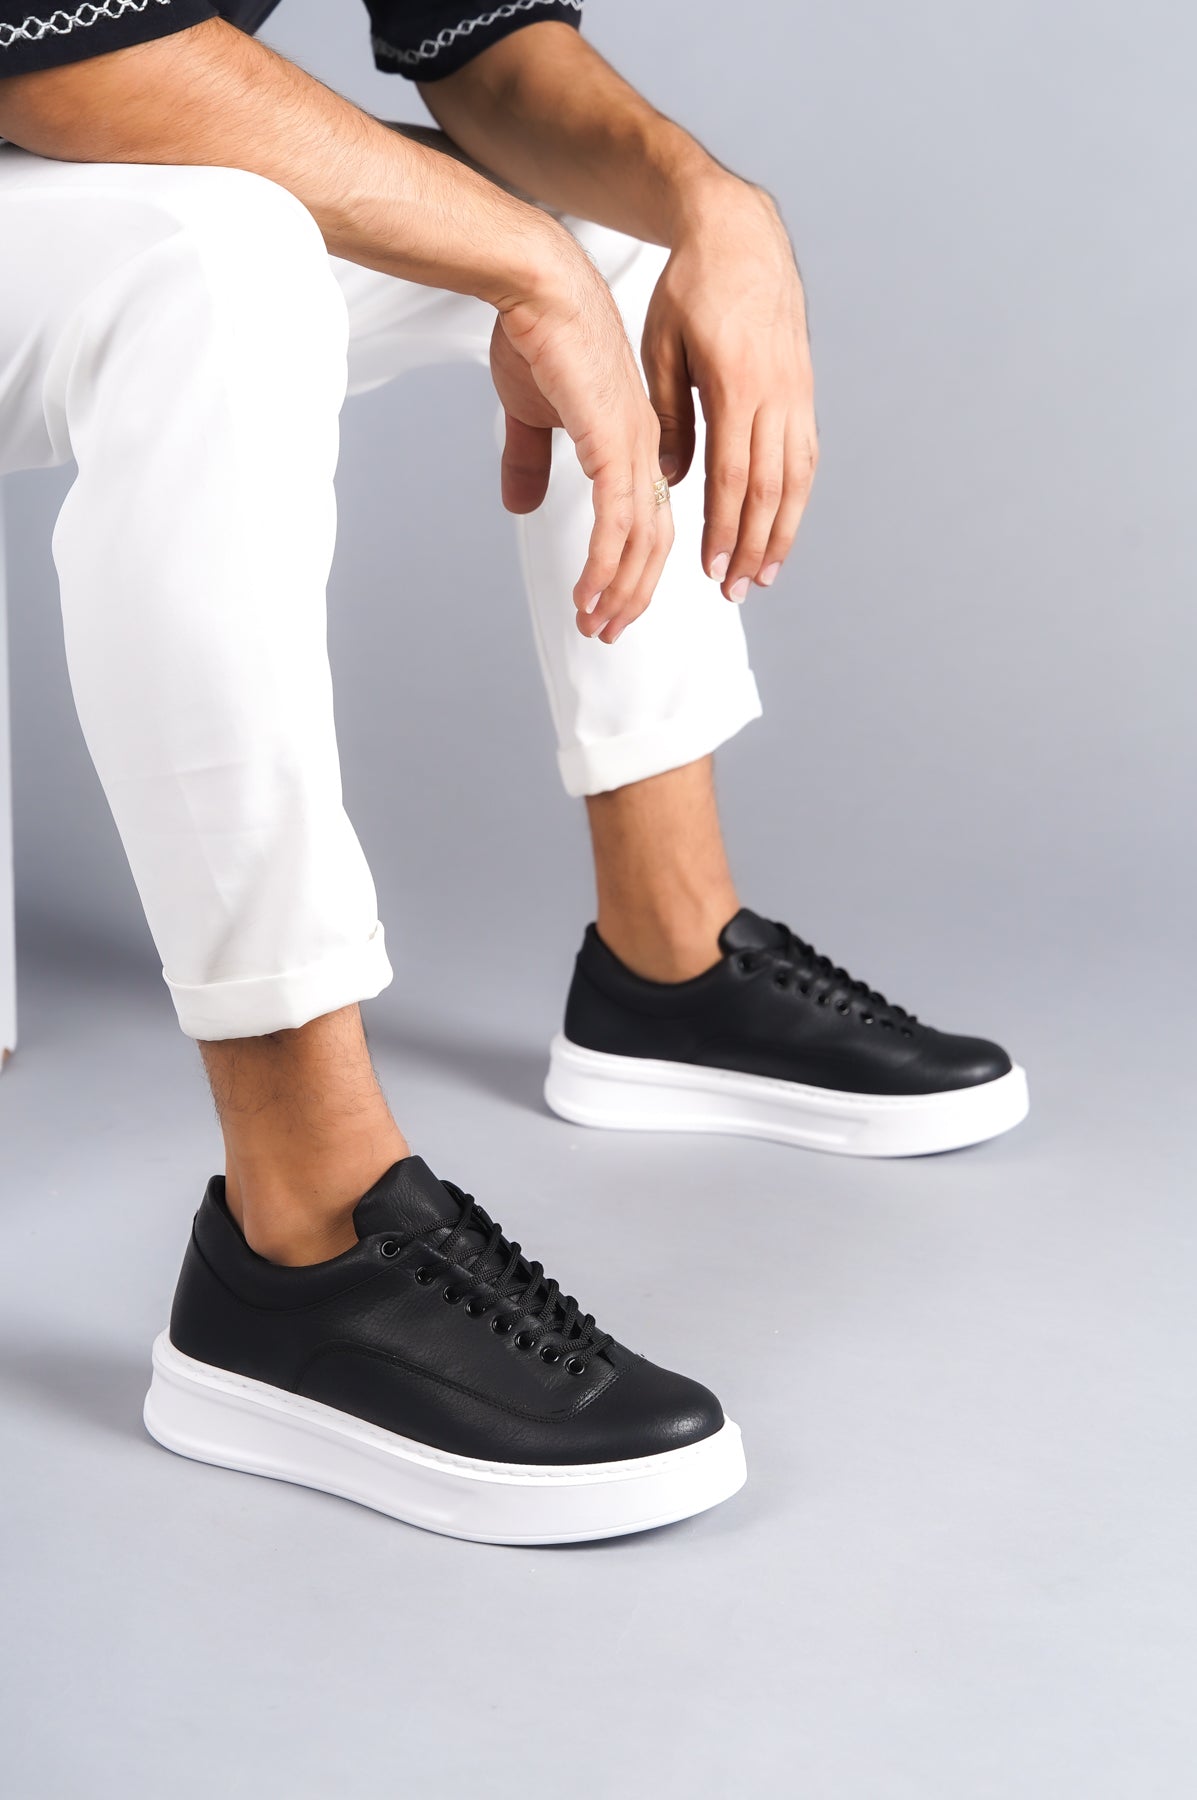 KB-005 Black Skin Lace-Up Casual Men's Sneakers Shoes - STREETMODE™